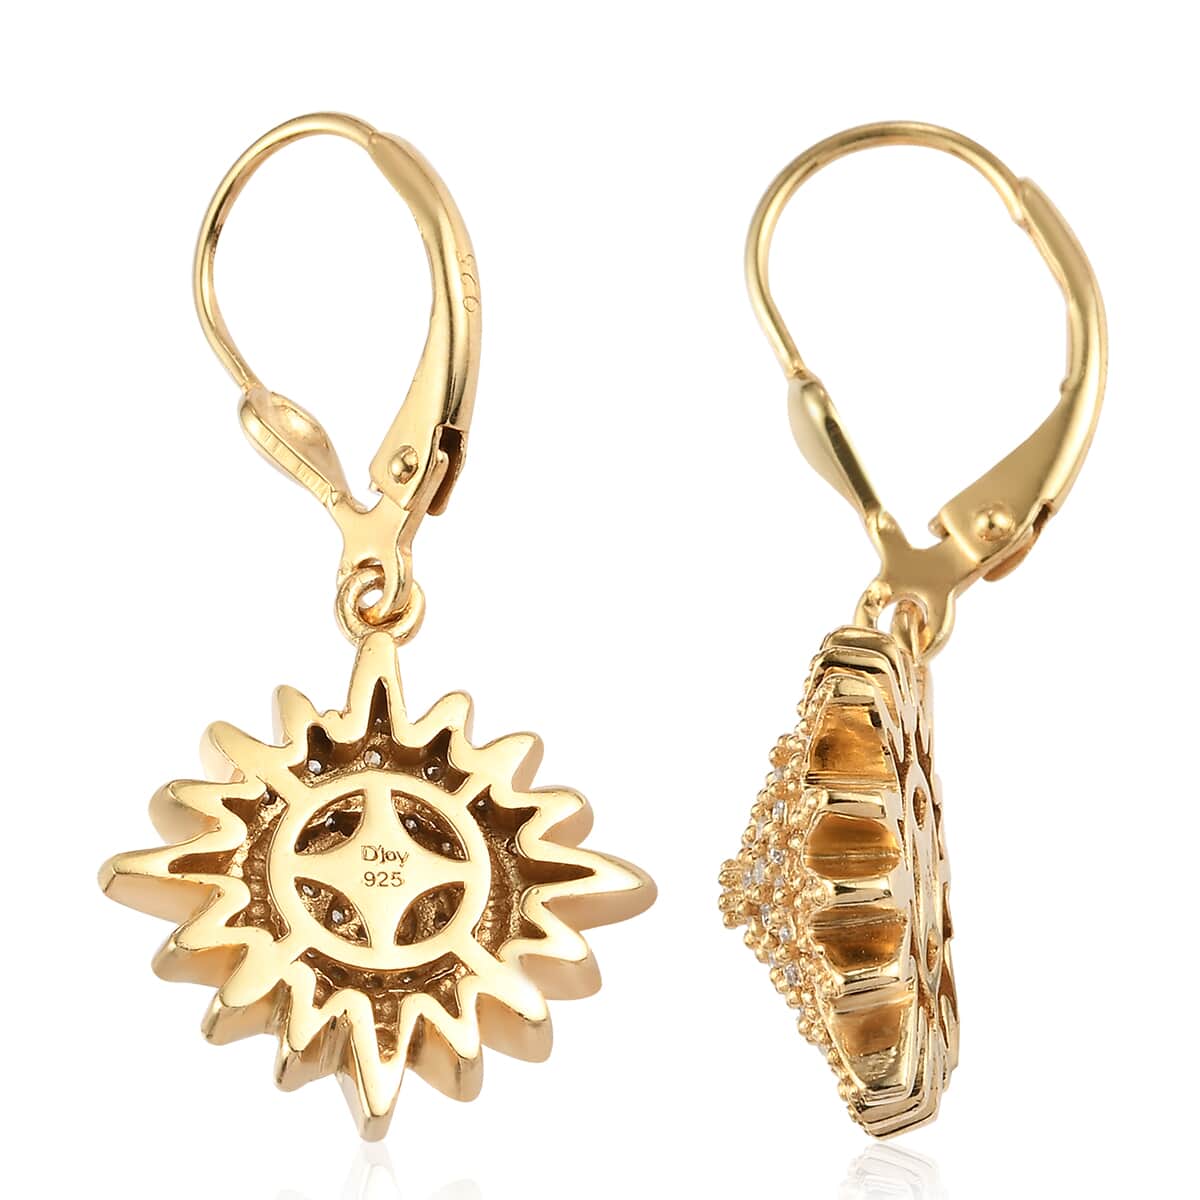 Tis the Season to Sparkle Jewelry Gift Set with Simulated Diamond Starburst Drop Earrings in 14K Yellow Gold Over Sterling Silver 0.90 ctw image number 5